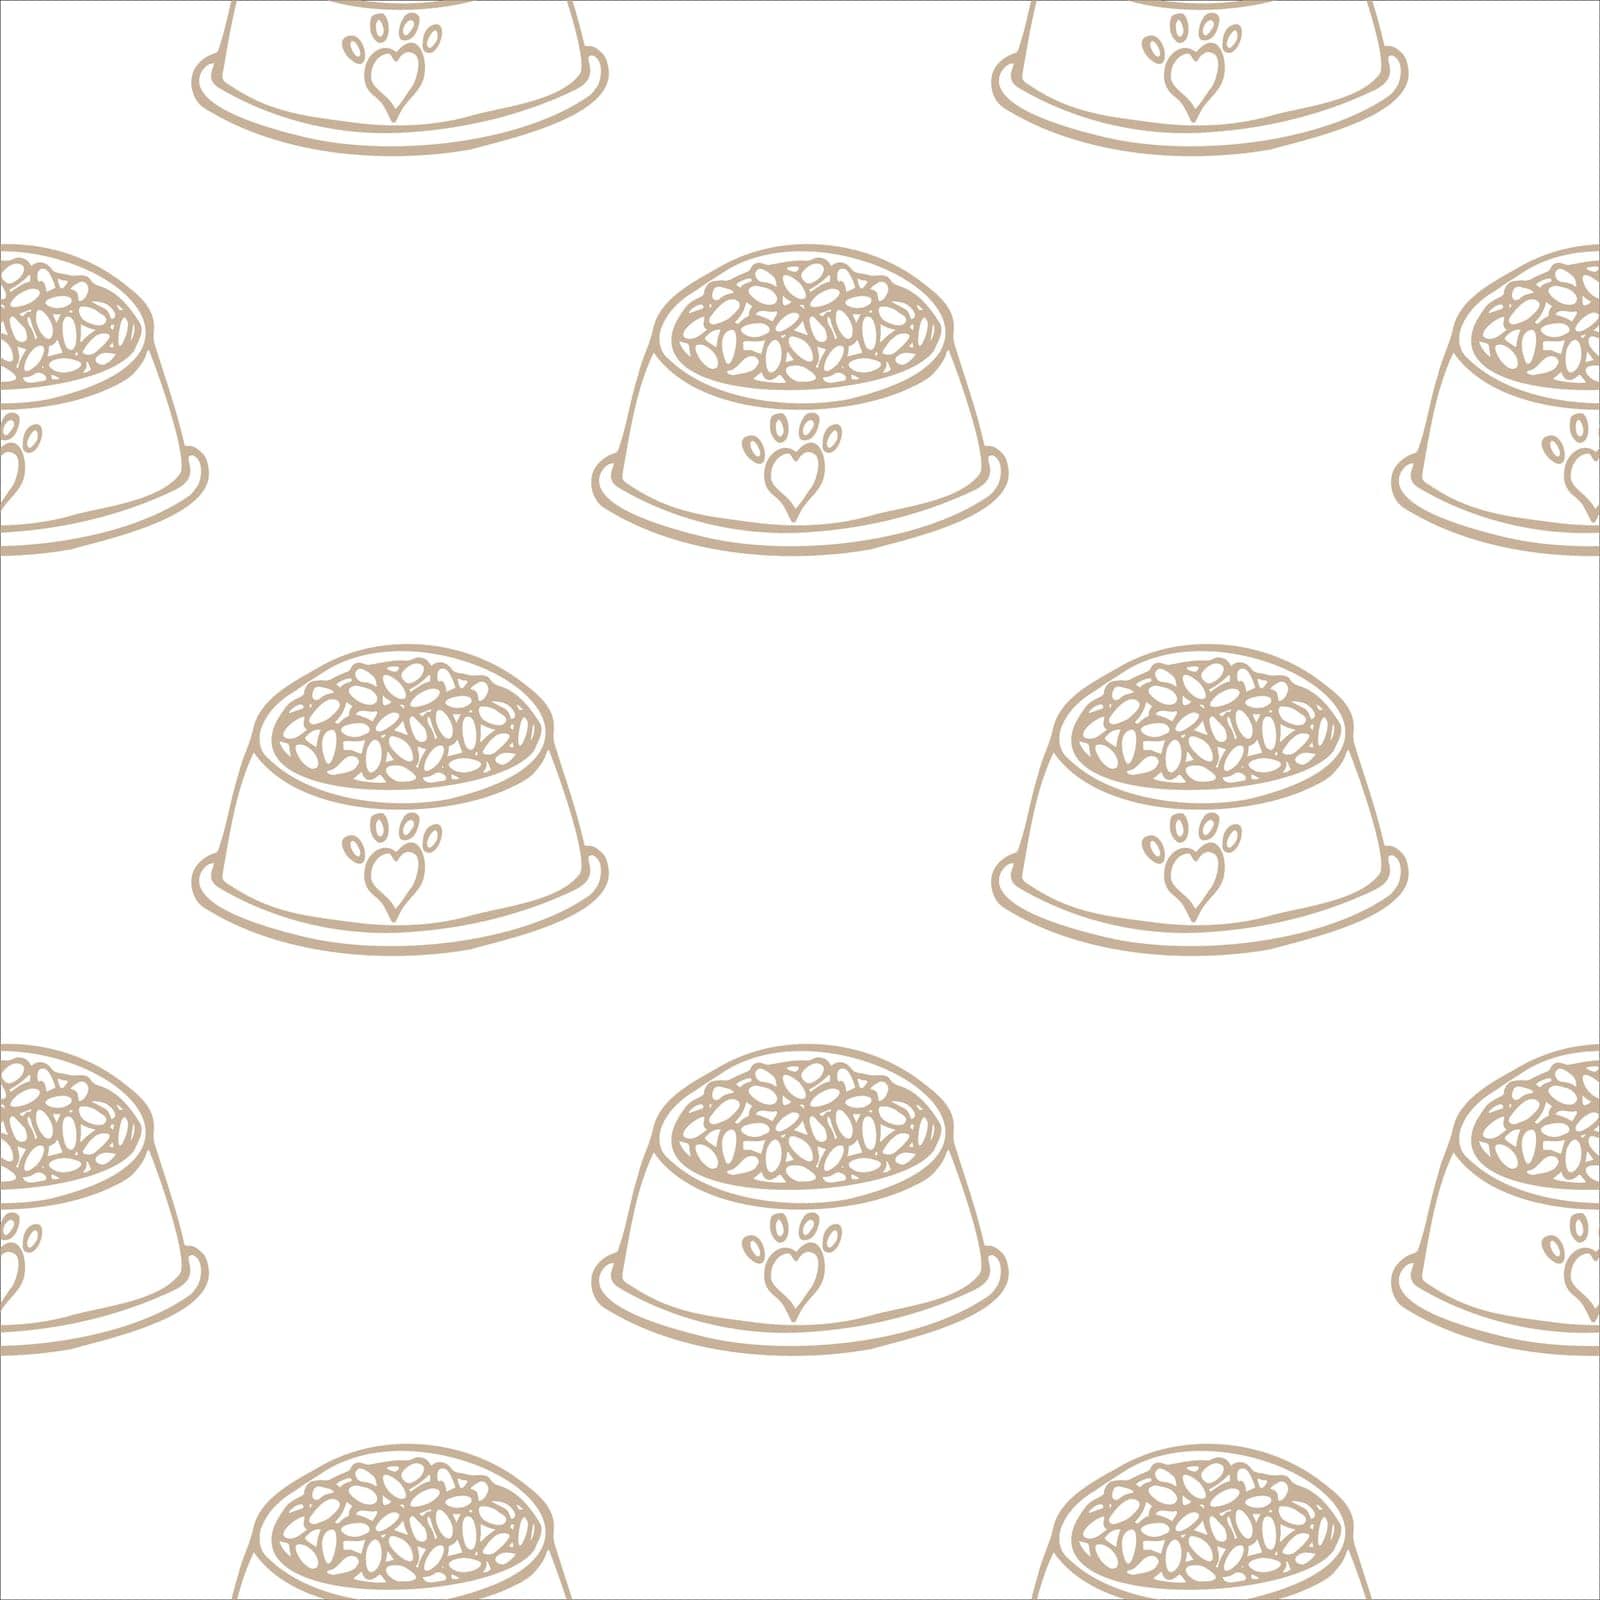 Seamless pattern with bowls with dry pet food. Background with a full bowl of food for a dog, cat, hand drawn in doodle style. For wallpaper, background, wrapping paper, fabric. Vector illustration.